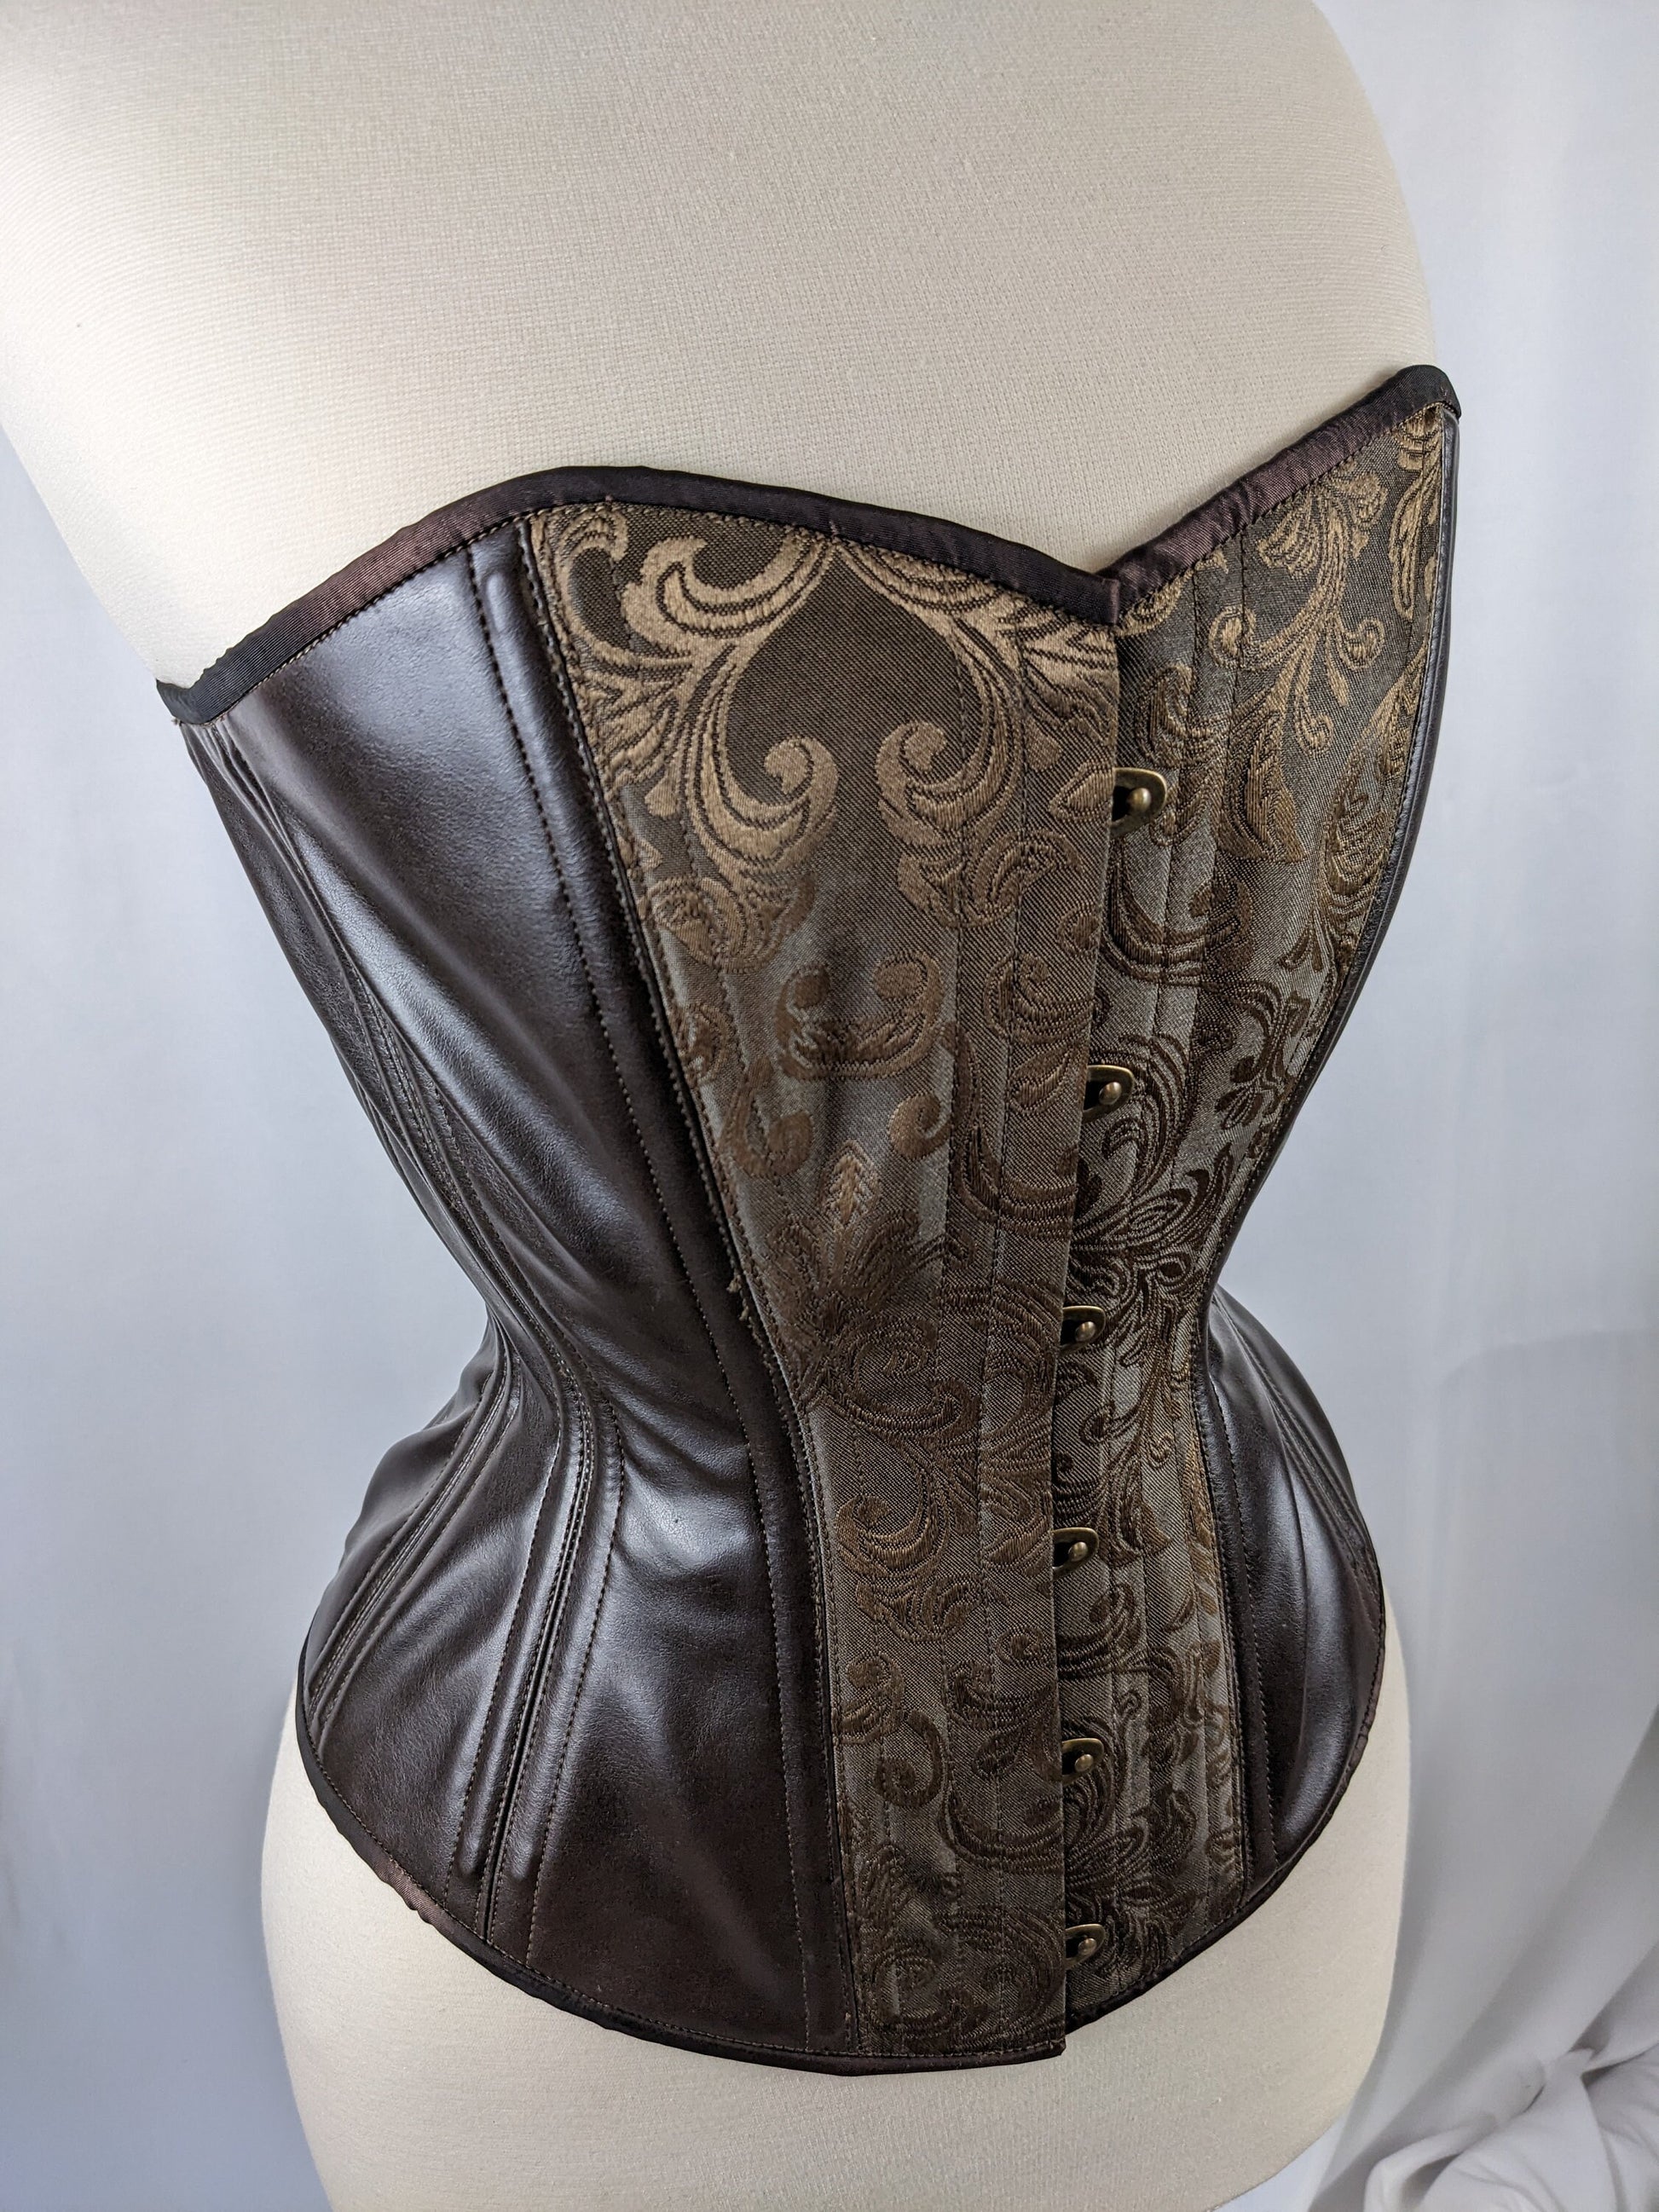 We have Bespoke Corset and Steampunk Corset for you right here